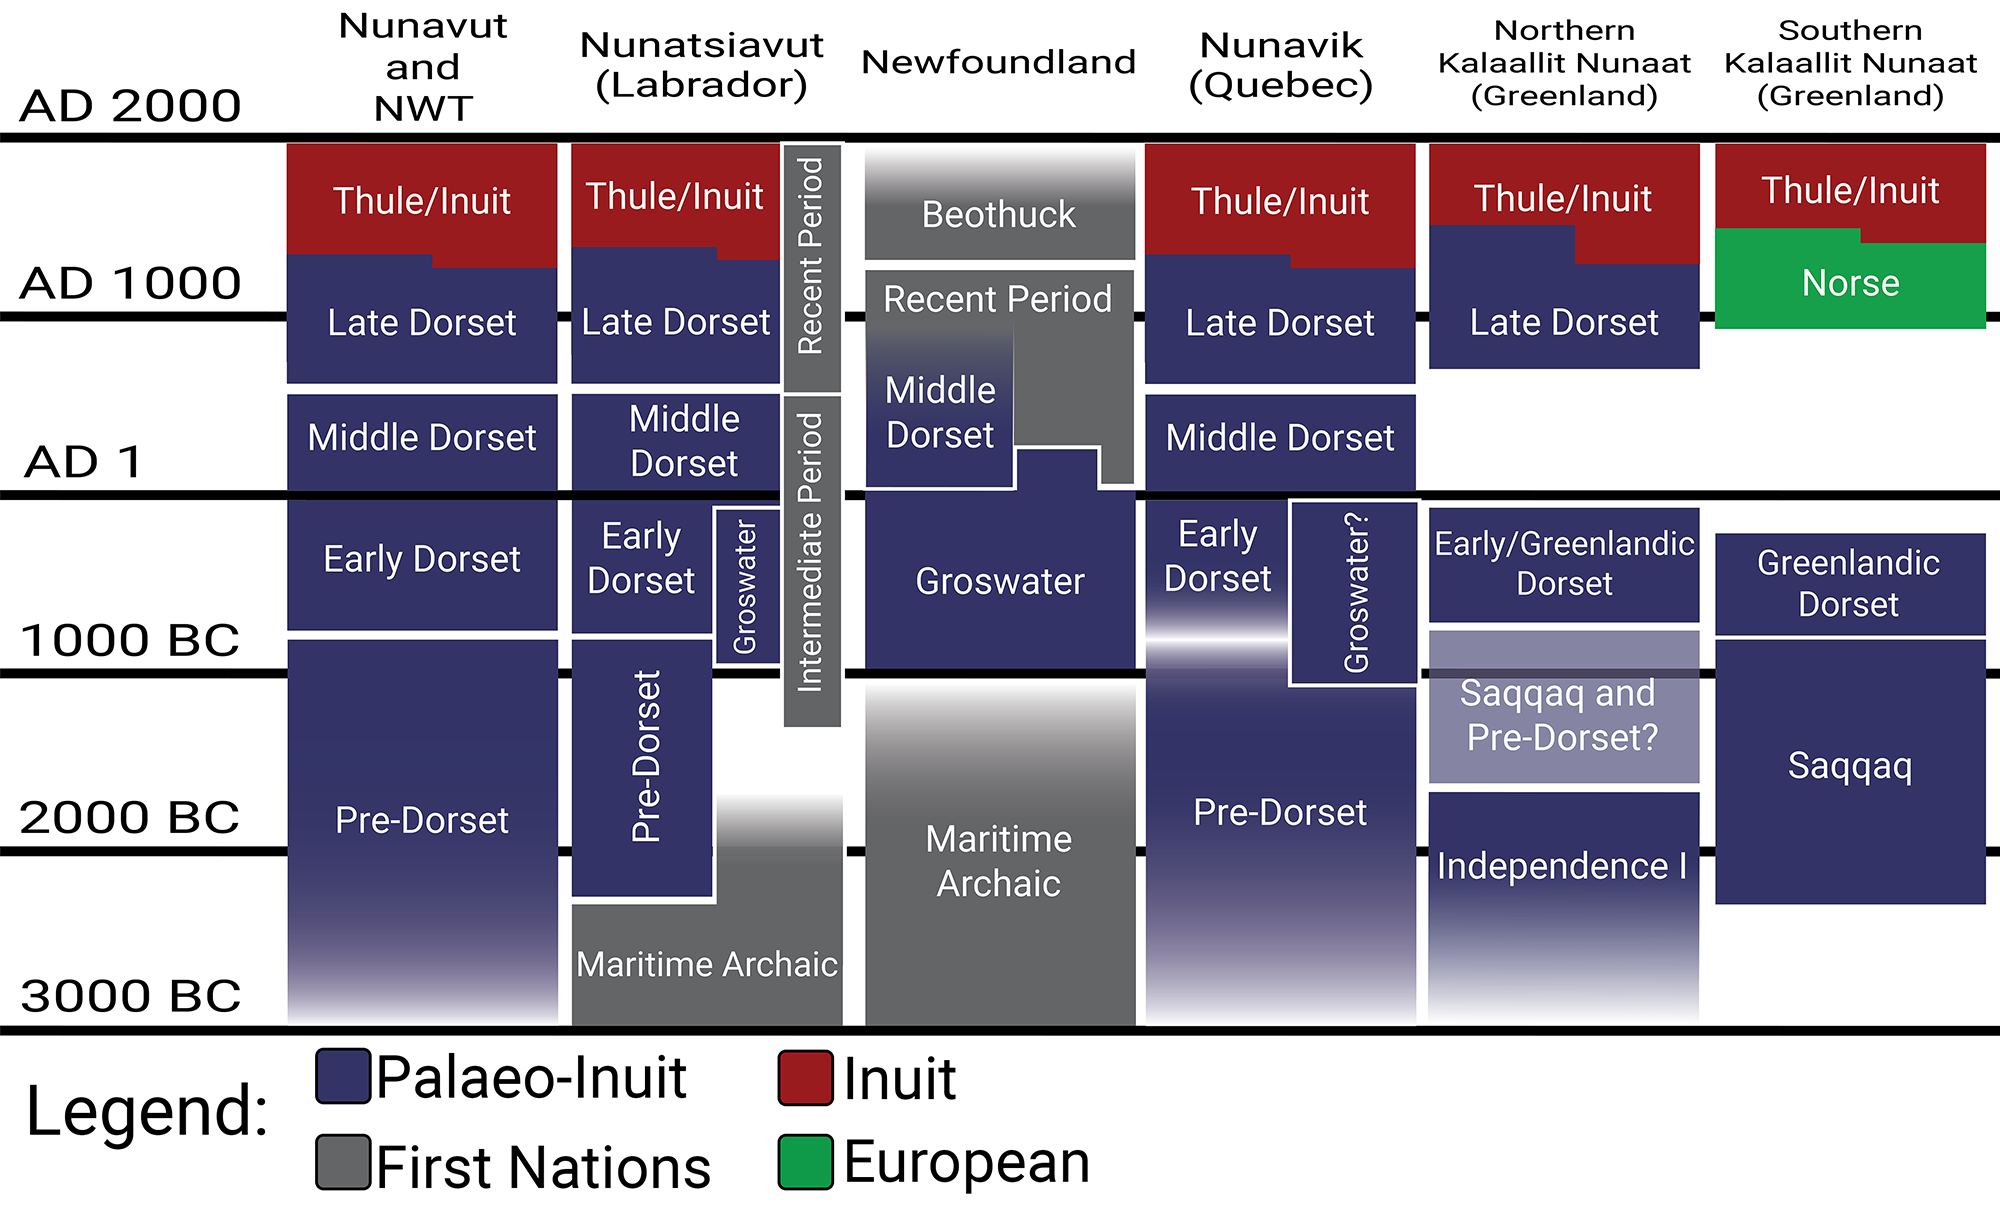 Figure 1: Culture History of the Eastern North American Arctic. An Inuit term for “Dorset” is Tuniit.